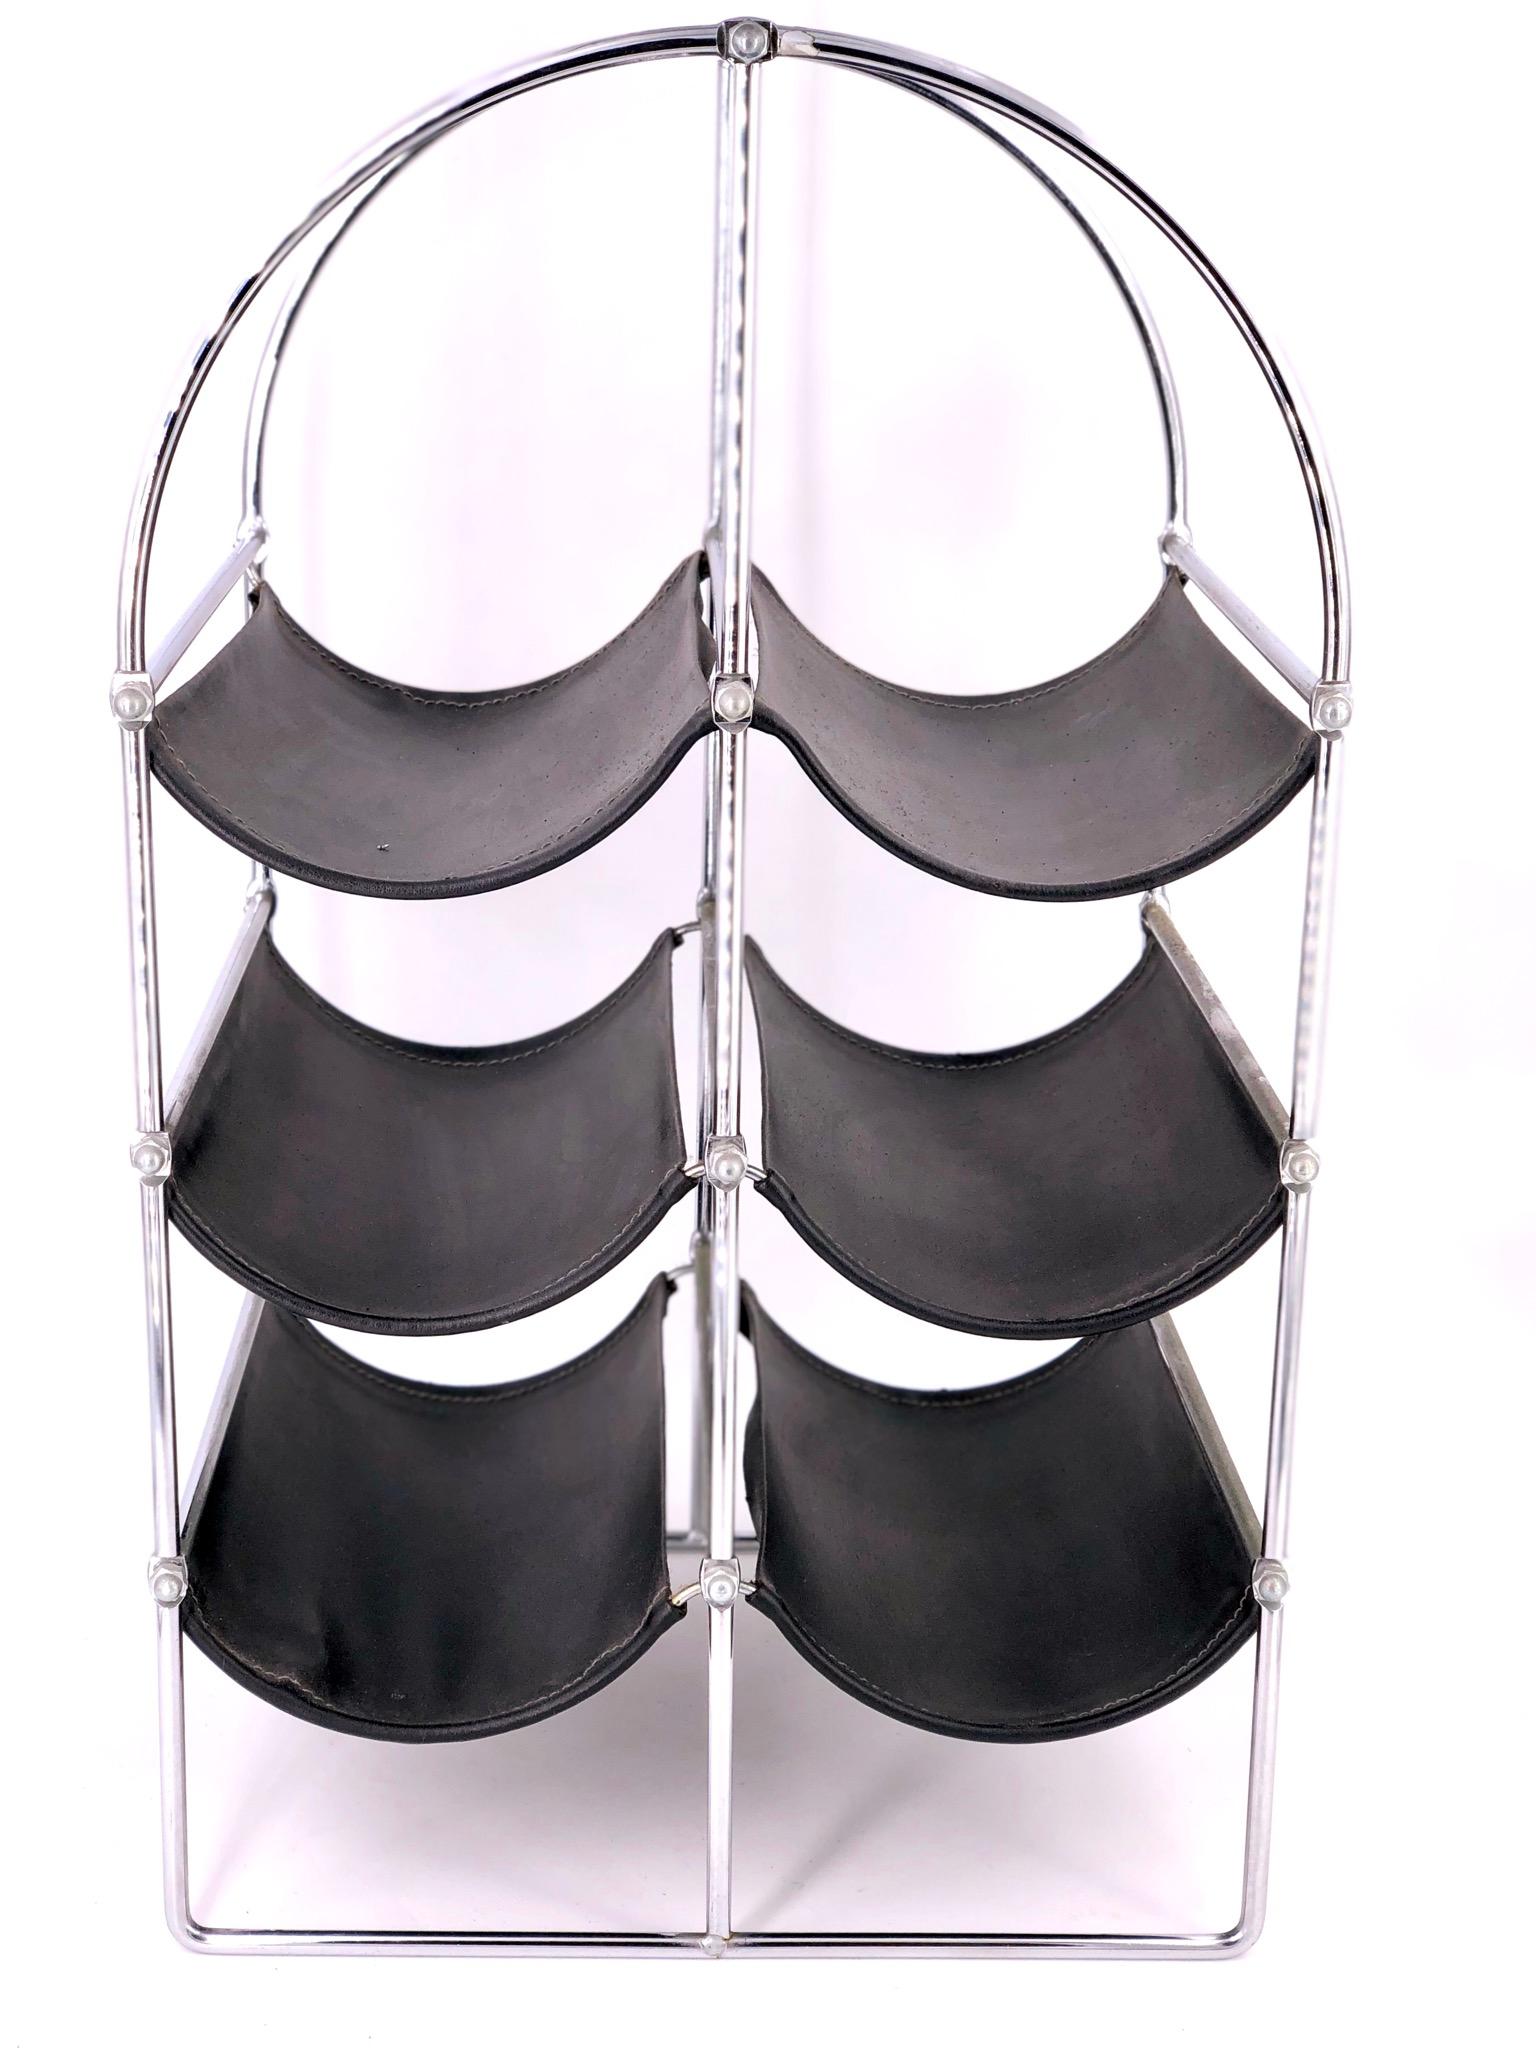 Space Age 1970s Six Bottle Capacity Wine Rack in Chrome and Leather